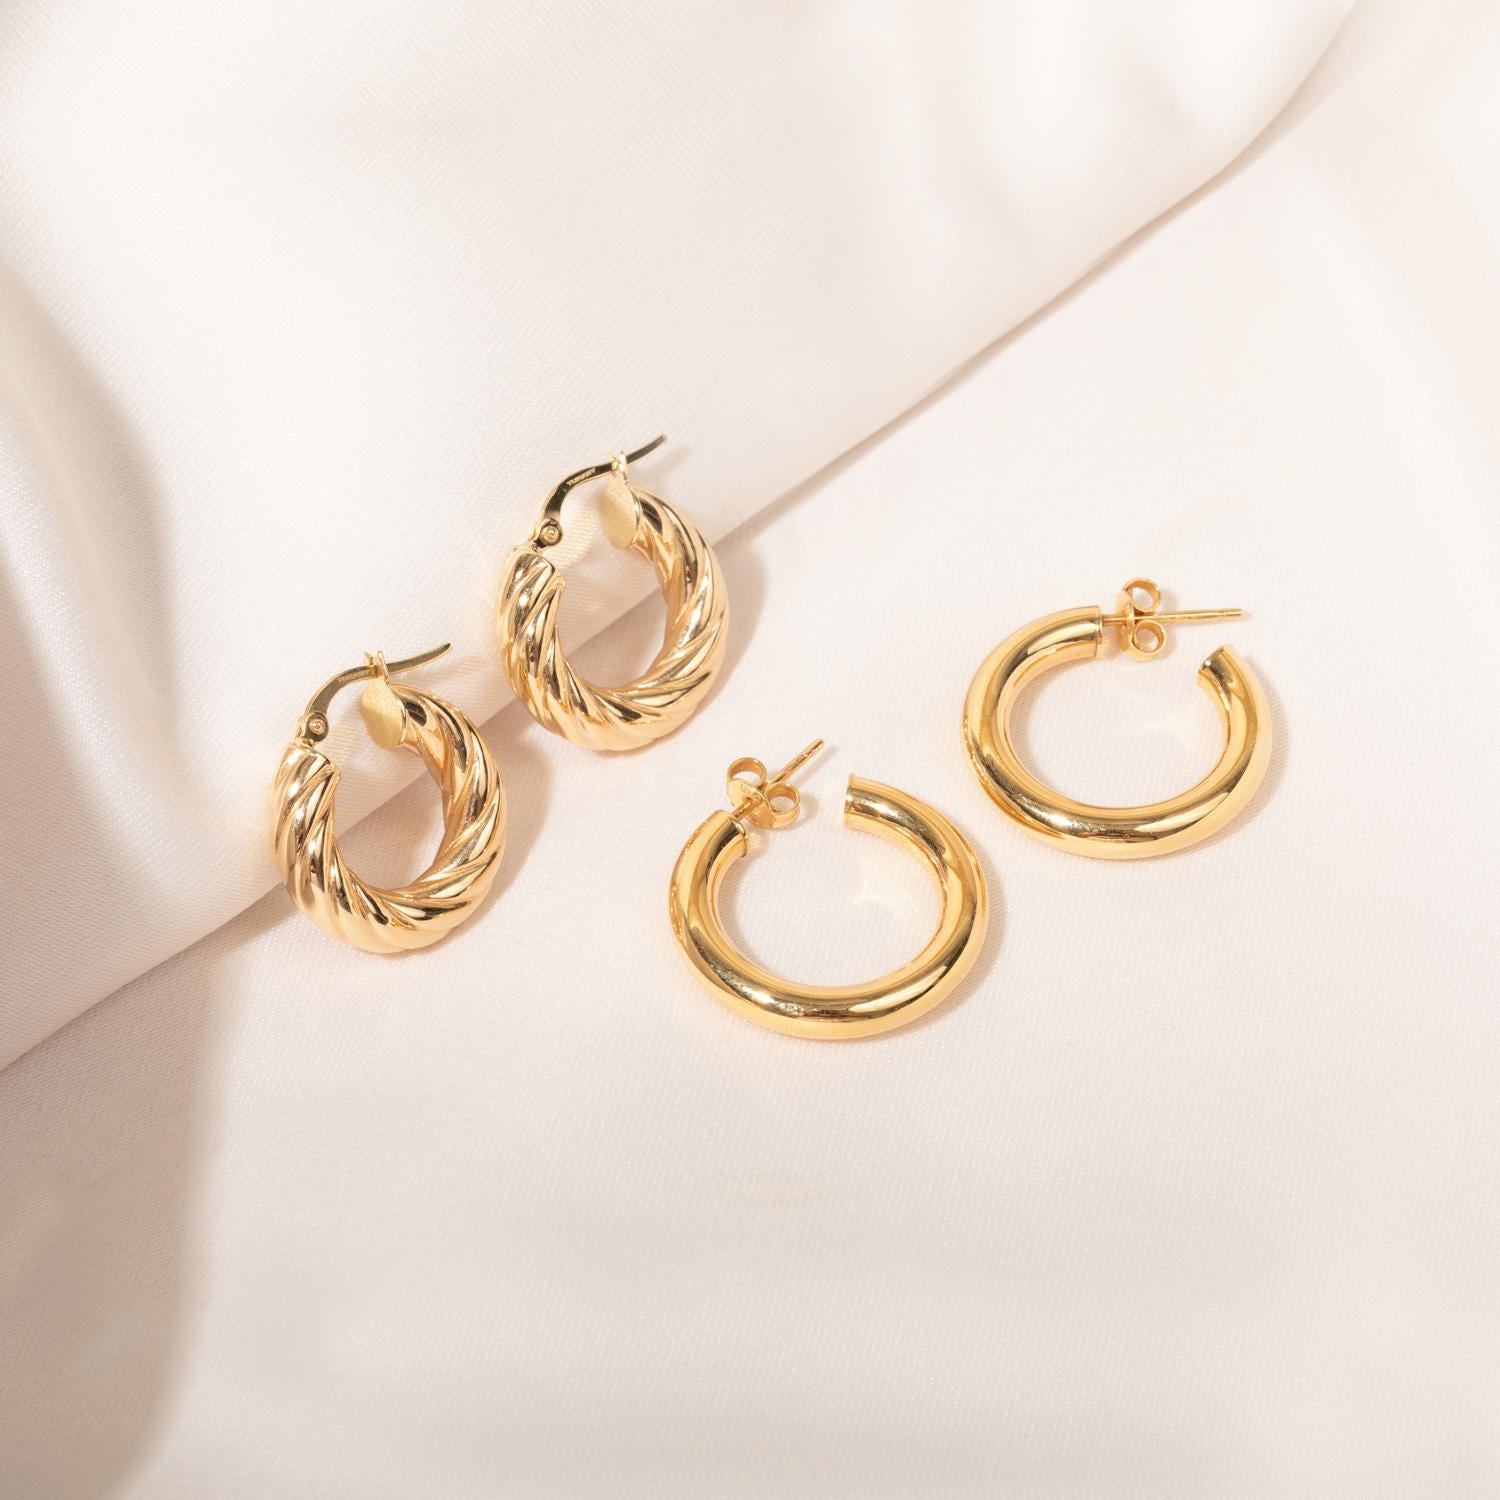 These croissant hoop earrings are simple yet eye-catching and will make the perfect addition to your jewelry collection!

14K Gold
Measures: 5 x 20 millimeters
Sold as a pair

All Alberto pieces are made in the U.S.A and come with a lifetime